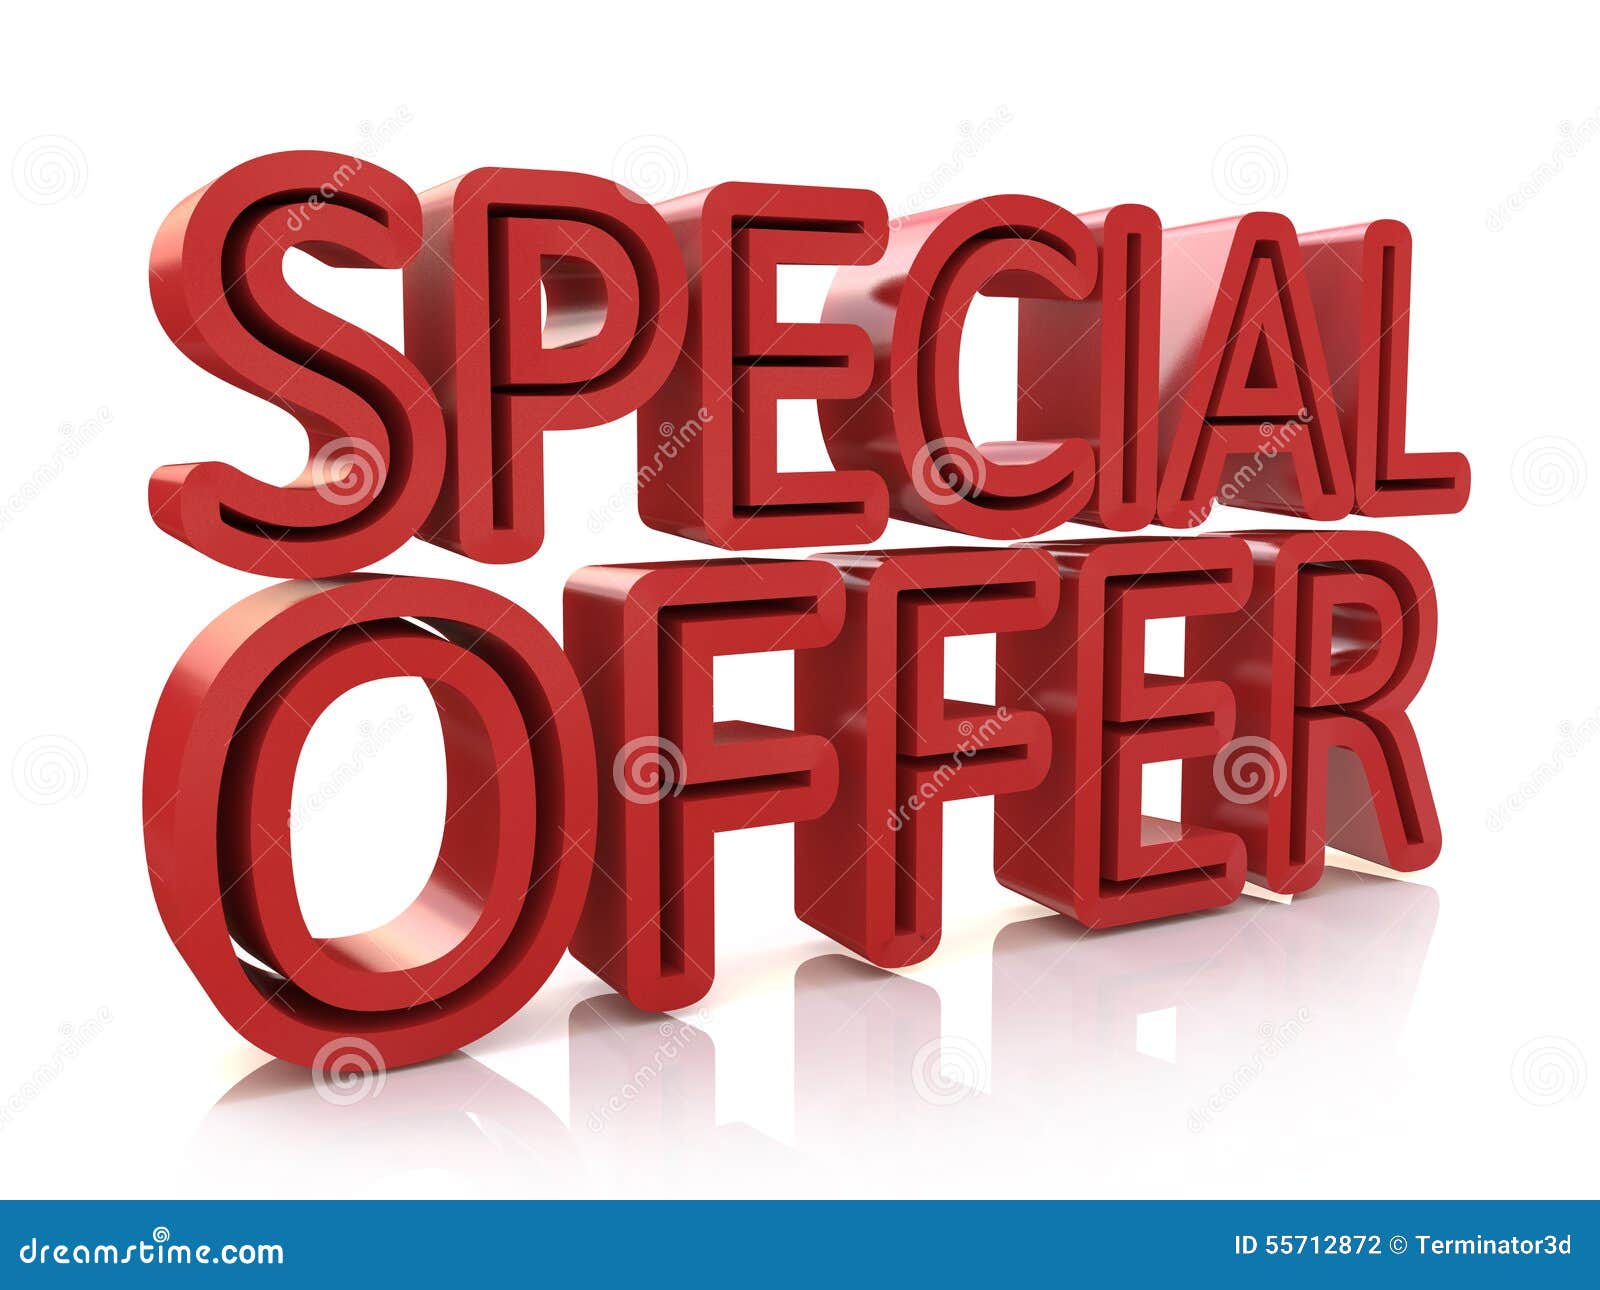 3d Special Offer Word On White Background Stock Illustration